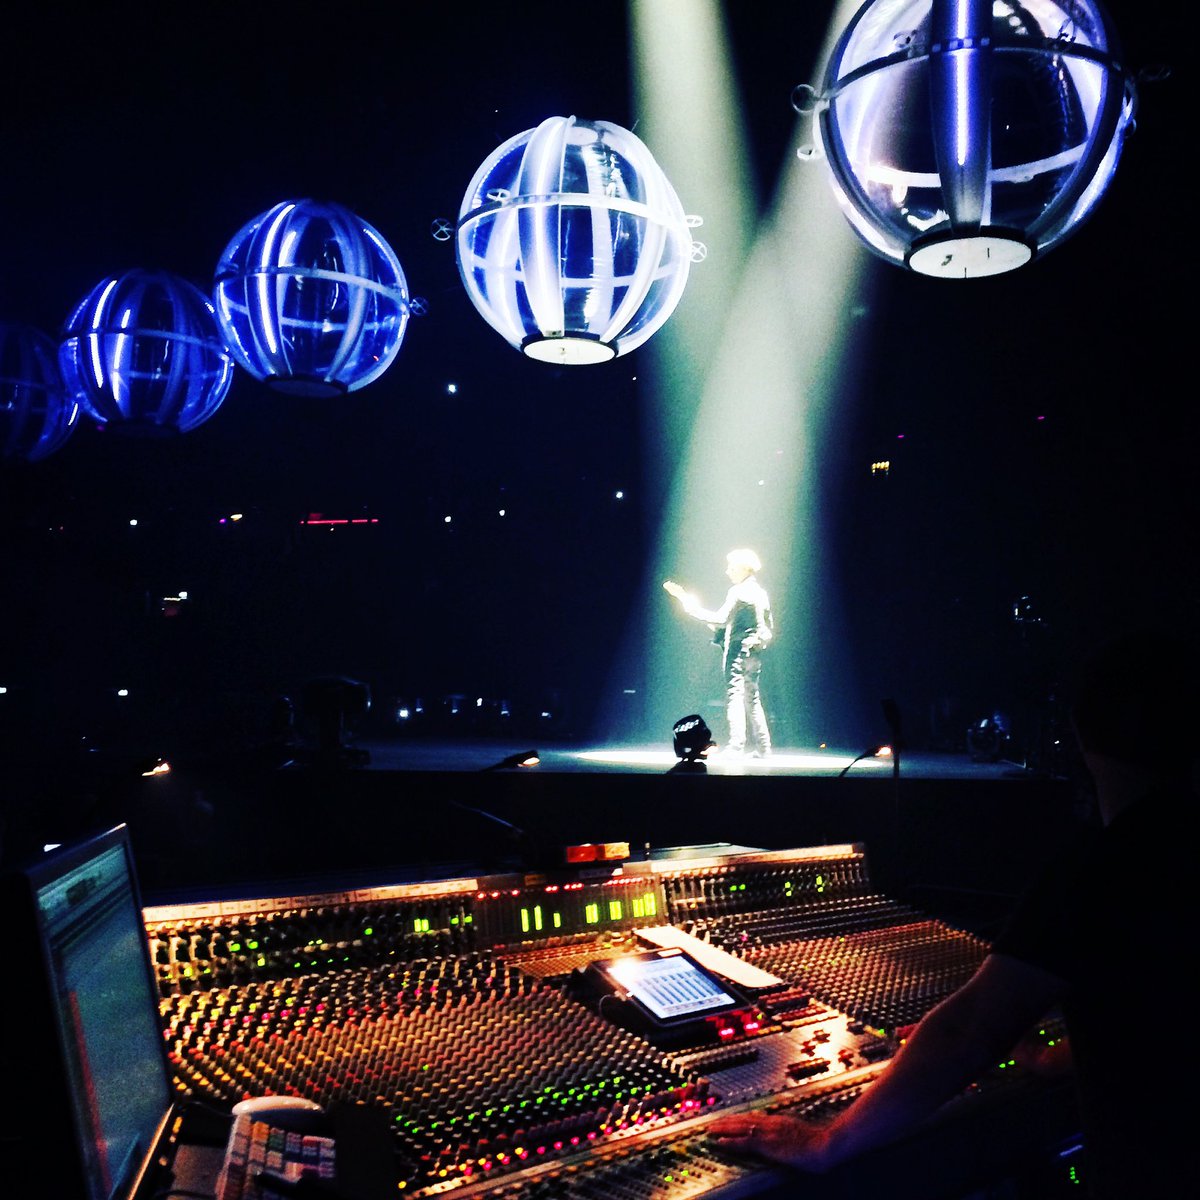 Back on the Muse “Drones” tour, I often ended up with some unique views!  #livemusic #foh #engineering #sound #livesound #livesoundengineering #muse #london #dronesworldtour #paris #bercy #analog #analogaudio #midas #mixing #mixingdesk #midasconsoles